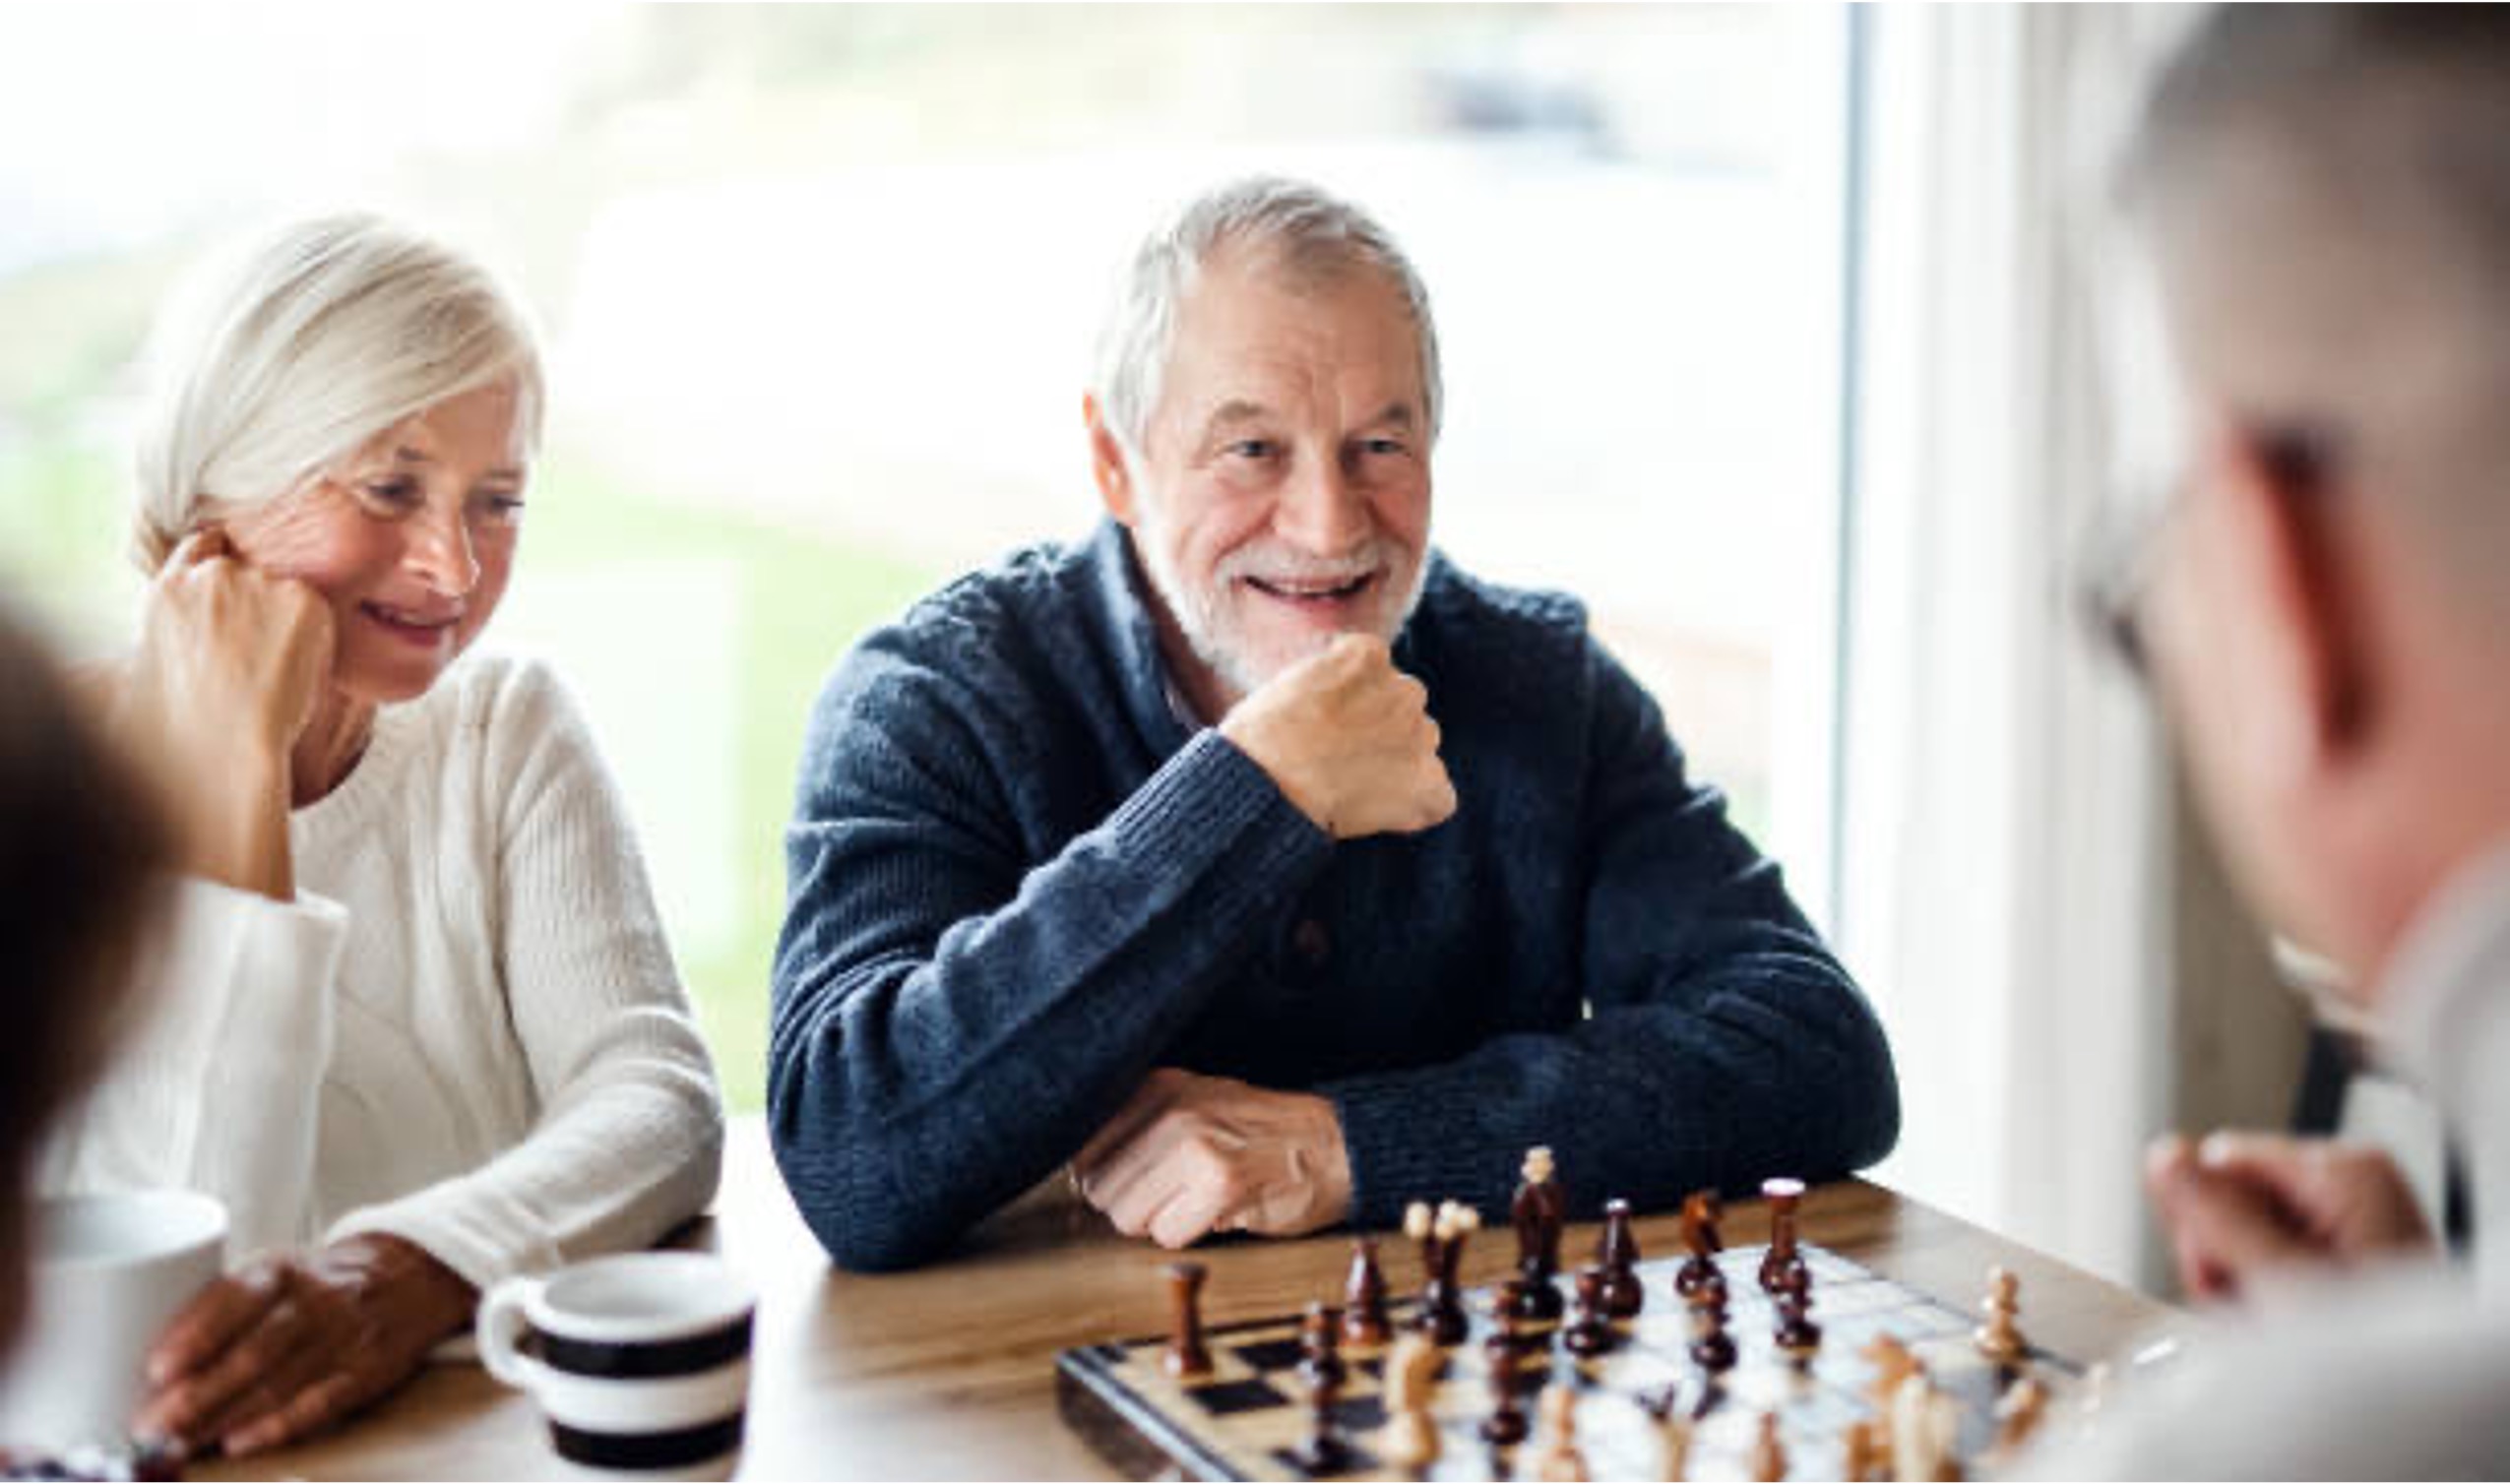 Local man surprised after anal beads fail to improve chess game